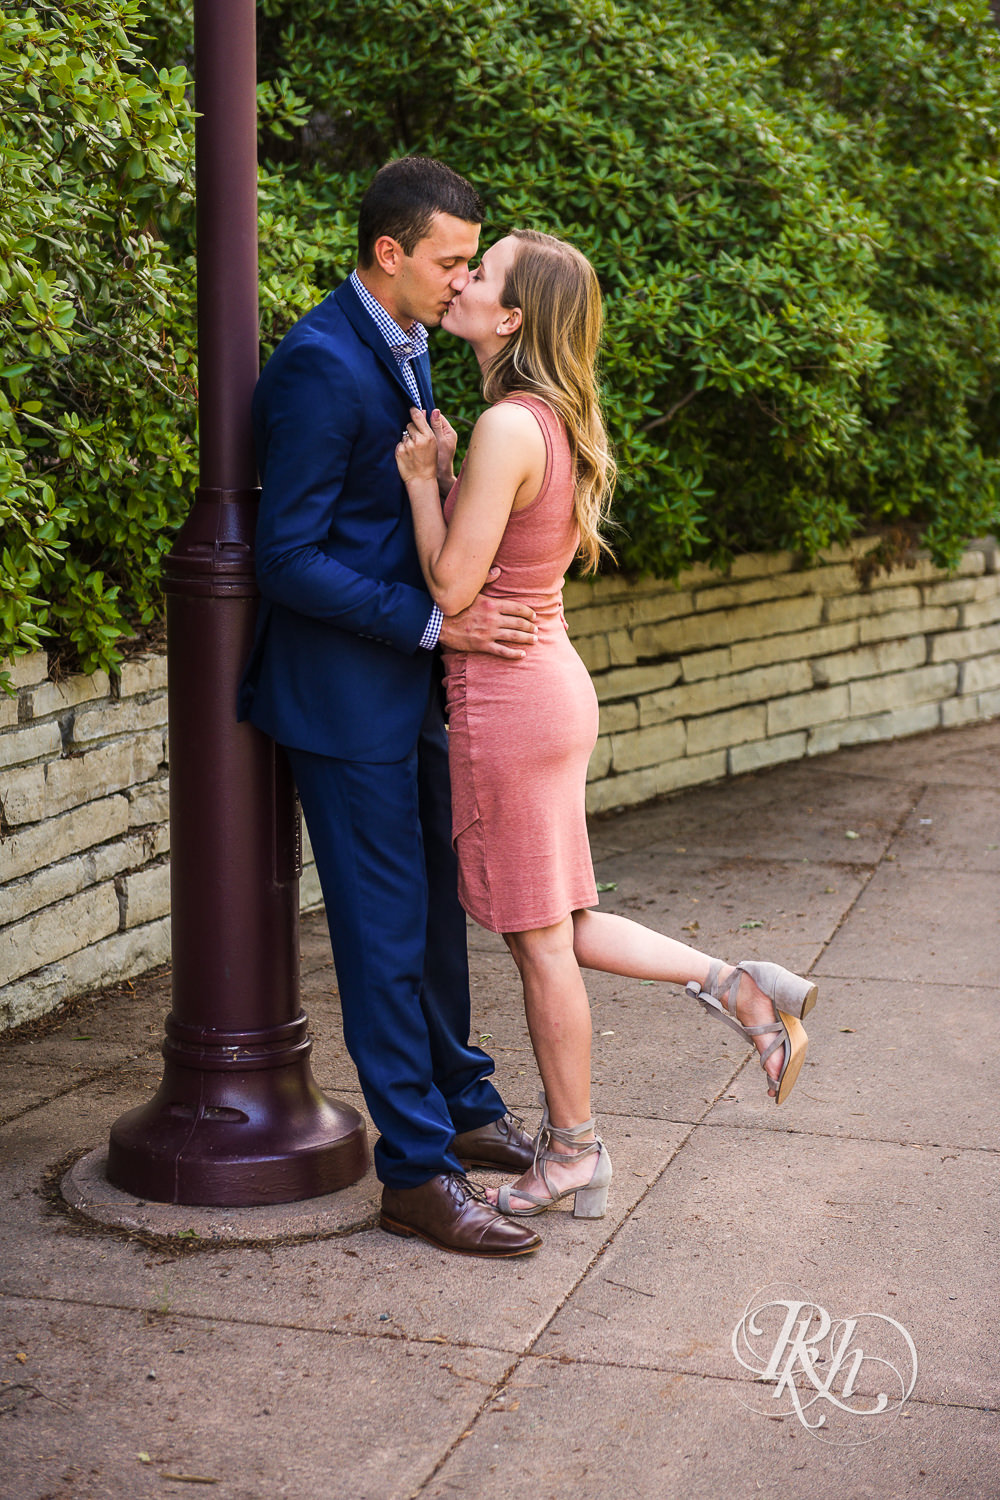 Man in blue suit and woman in pink dress kiss against pole in Centennial Lakes Park in Edina, Minnesota.